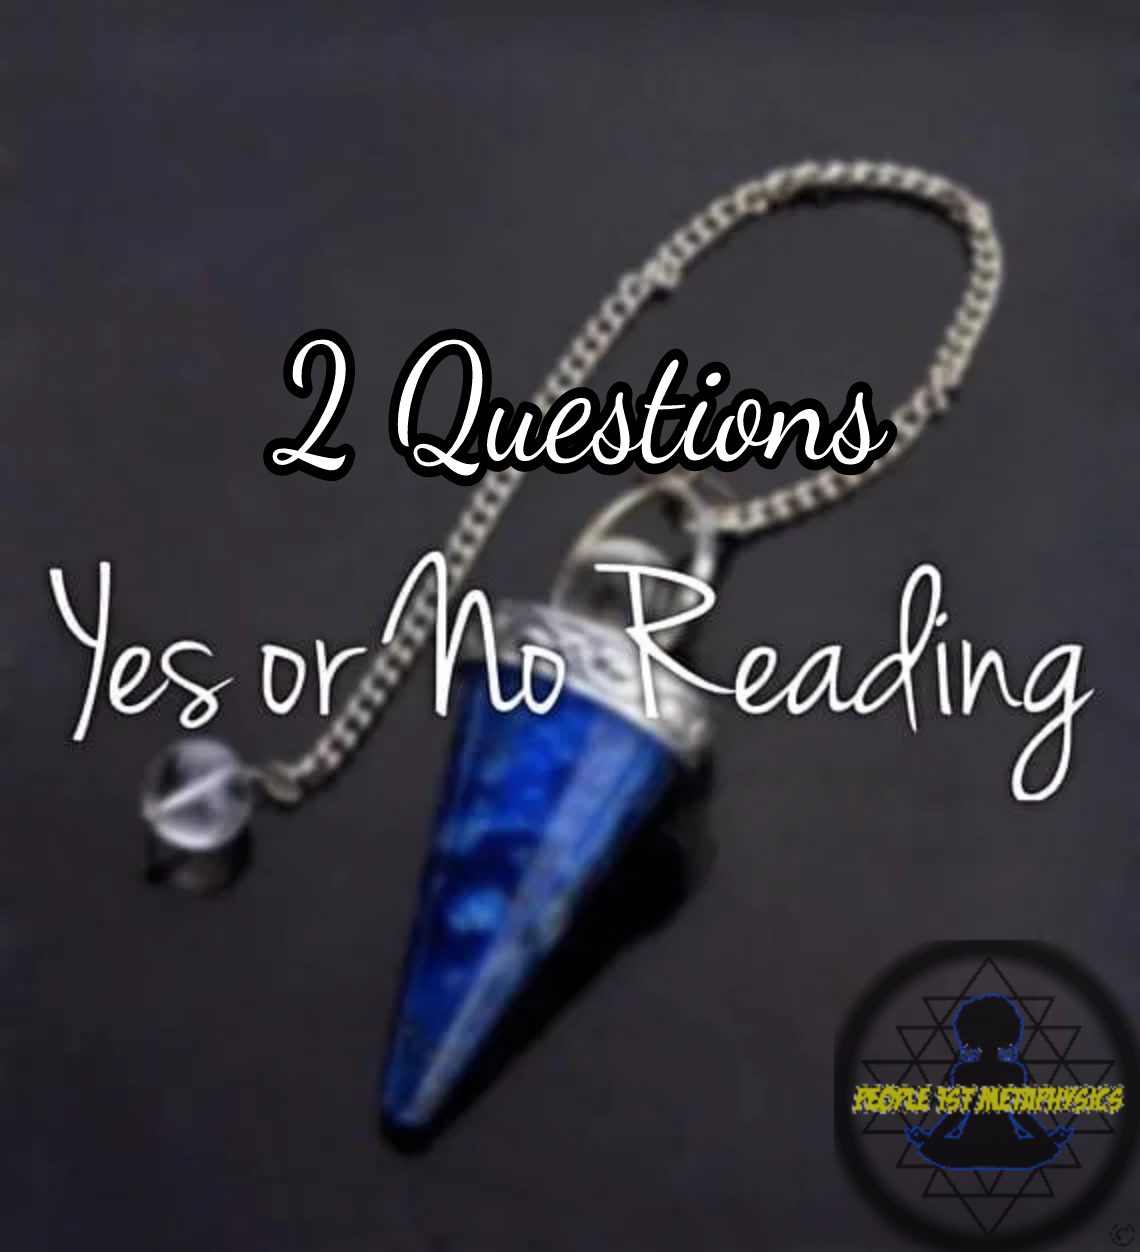 Ask any yes or no question (2 questions) and 2 Card Pull #PsychicReadings #People1stMetaPhysics #PendulumReadings #EnergyReadings